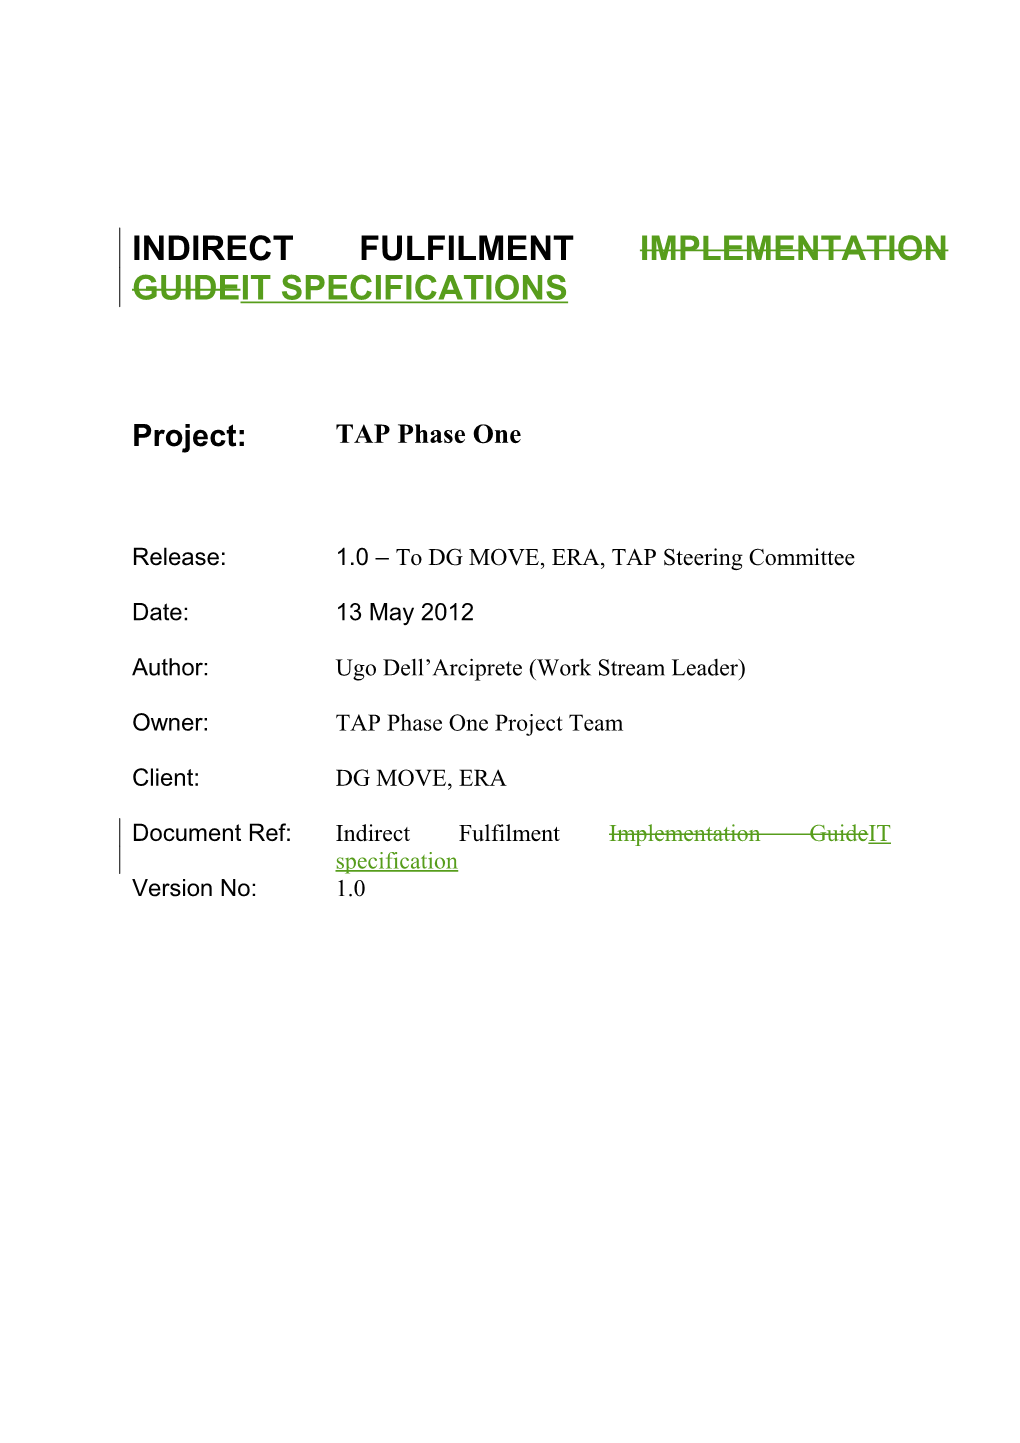 Indirect Fulfilment Implementation Guideit Specificationsrelease 1.0